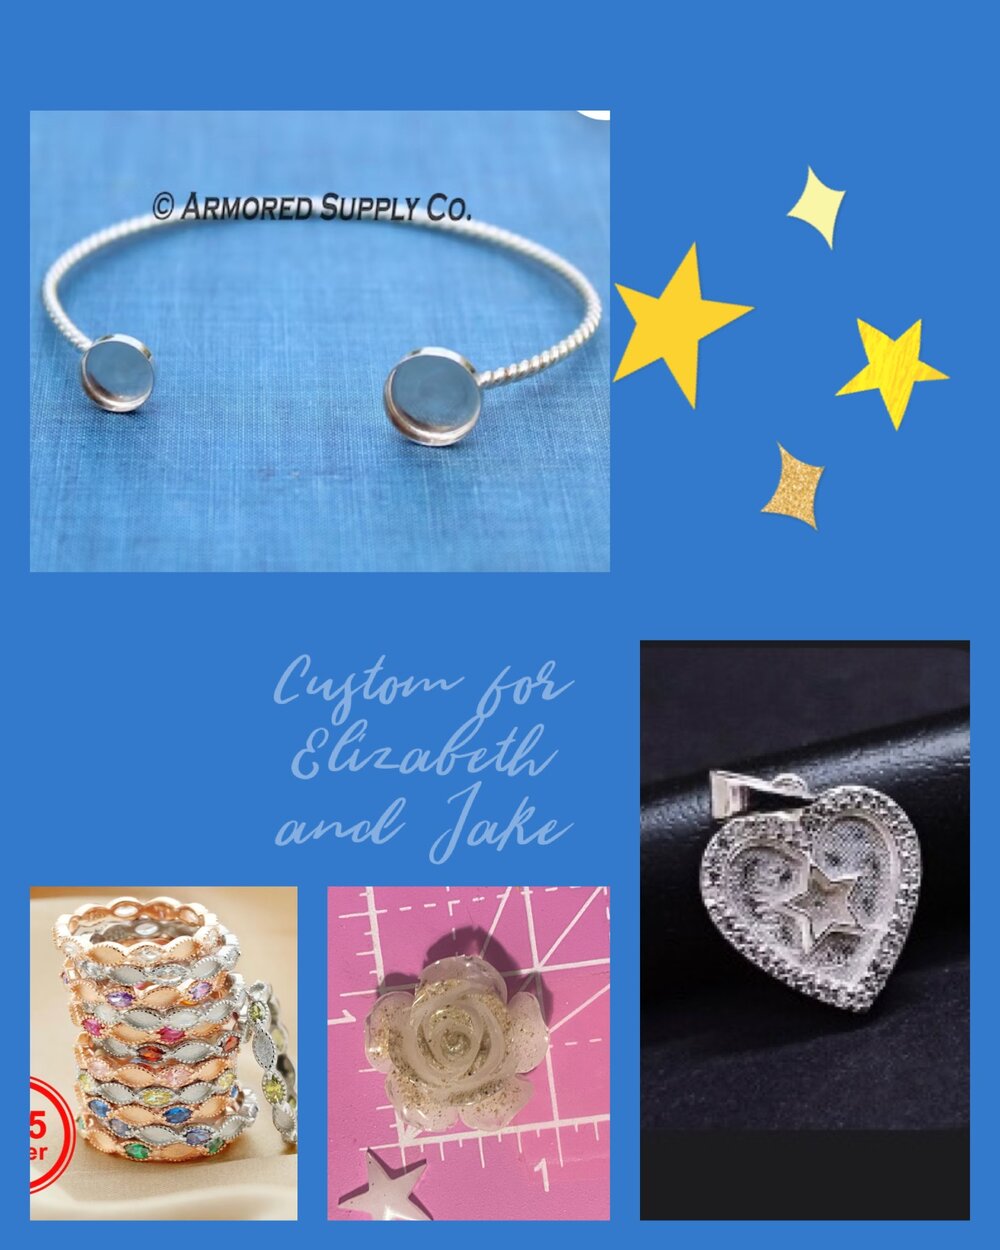 Animal Charms — Made With Love Keepsakes Breastmilk & Dna Jewelry